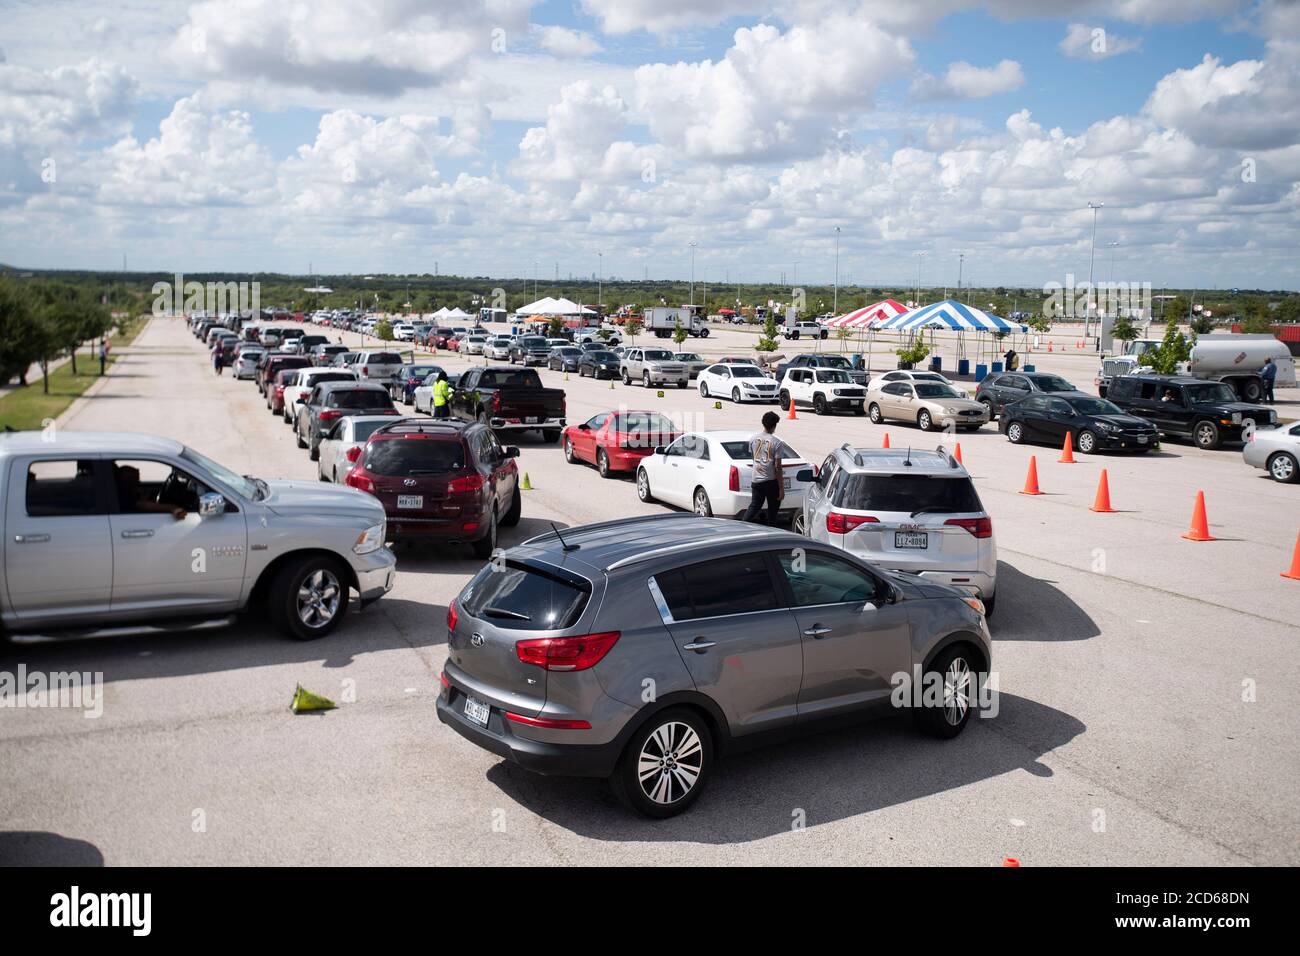 Austin, TX USA August 26, 2020: Hundreds of cars from coastal east Texas and southwest Louisiana wait in line at a Hurricane Laura evacuation center set up by Austin officials at the Circuit of the Americas race track parking areas. Early-arriving drivers received vouchers for hotel rooms. Once those ran out, drivers were directed to other evacuation centers in Waco and Dallas. Laura is expected to make landfall overnight as a Category 4 storm and wreak havoc along the Texas and Louisiana coasts and inland. Credit: Bob Daemmrich/Alamy Live News Stock Photo